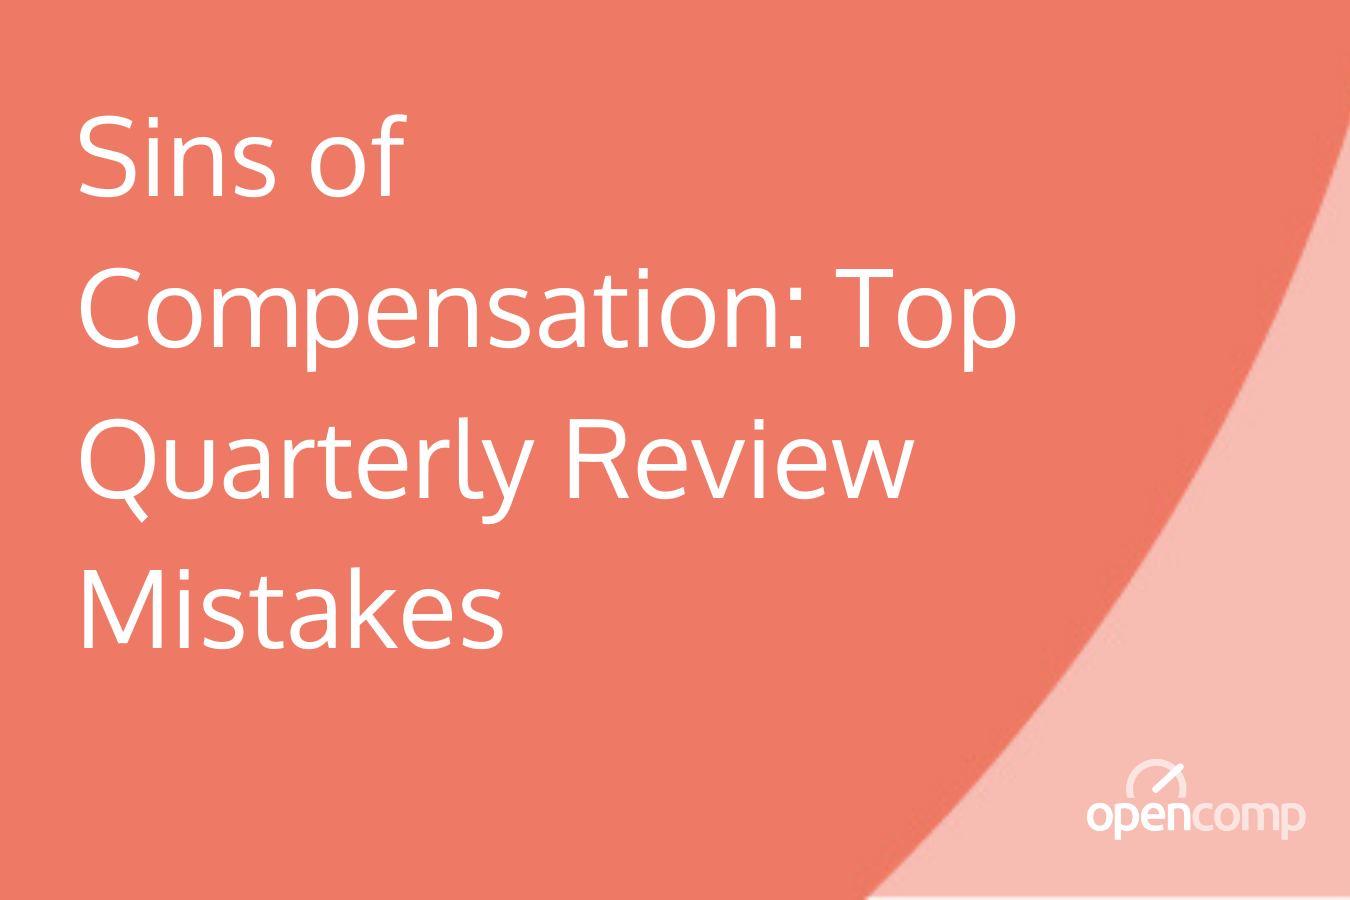 Sins of Compensation_ Top Quarterly Review Mistakes